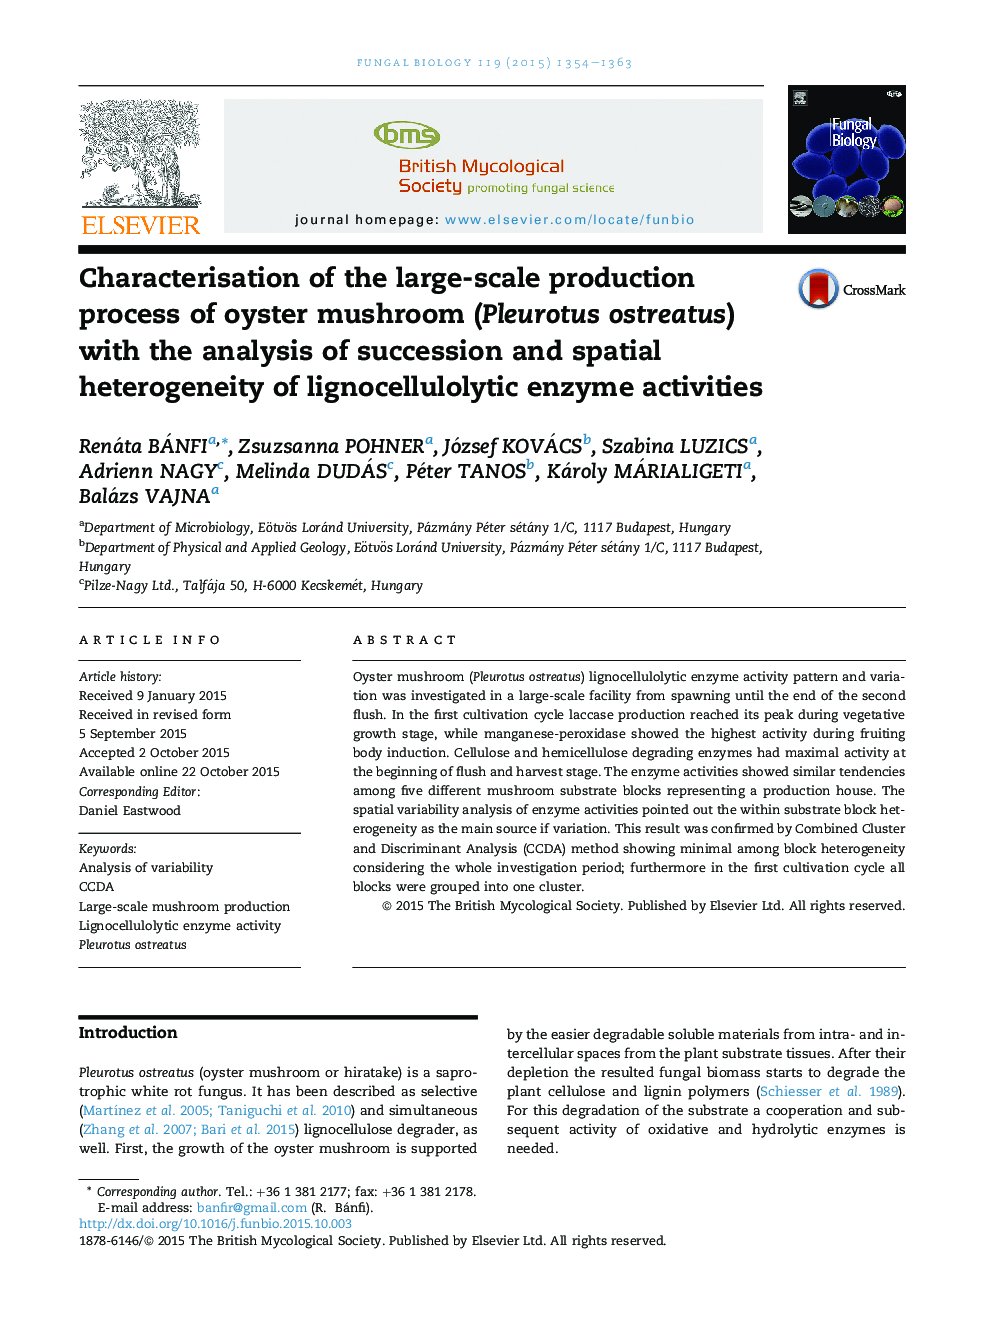 Characterisation of the large-scale production process of oyster mushroom (Pleurotus ostreatus) with the analysis of succession and spatial heterogeneity of lignocellulolytic enzyme activities